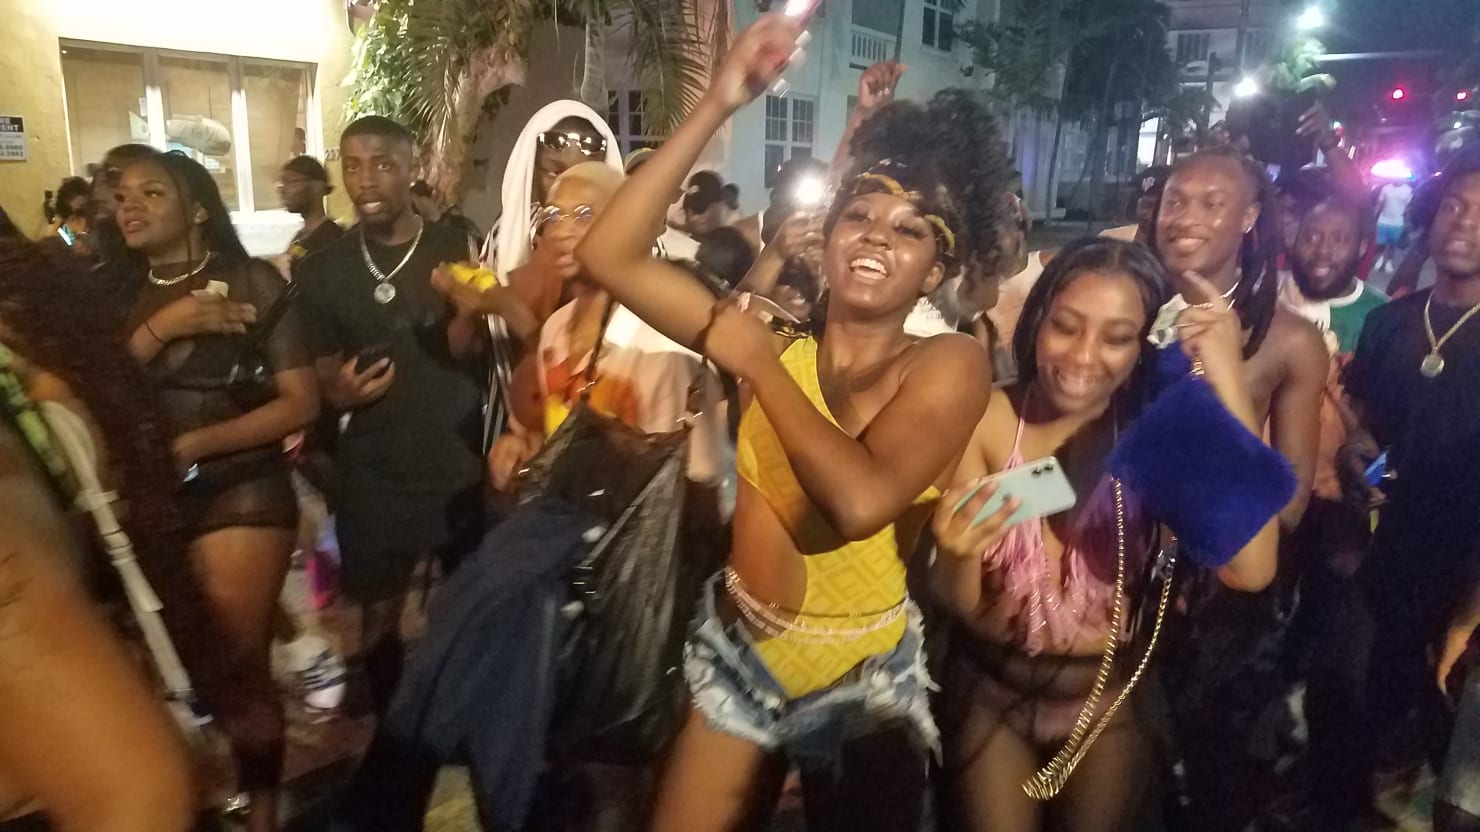 Miami Beach Freaks Out Over Massive Spring Break Crowds Declares State